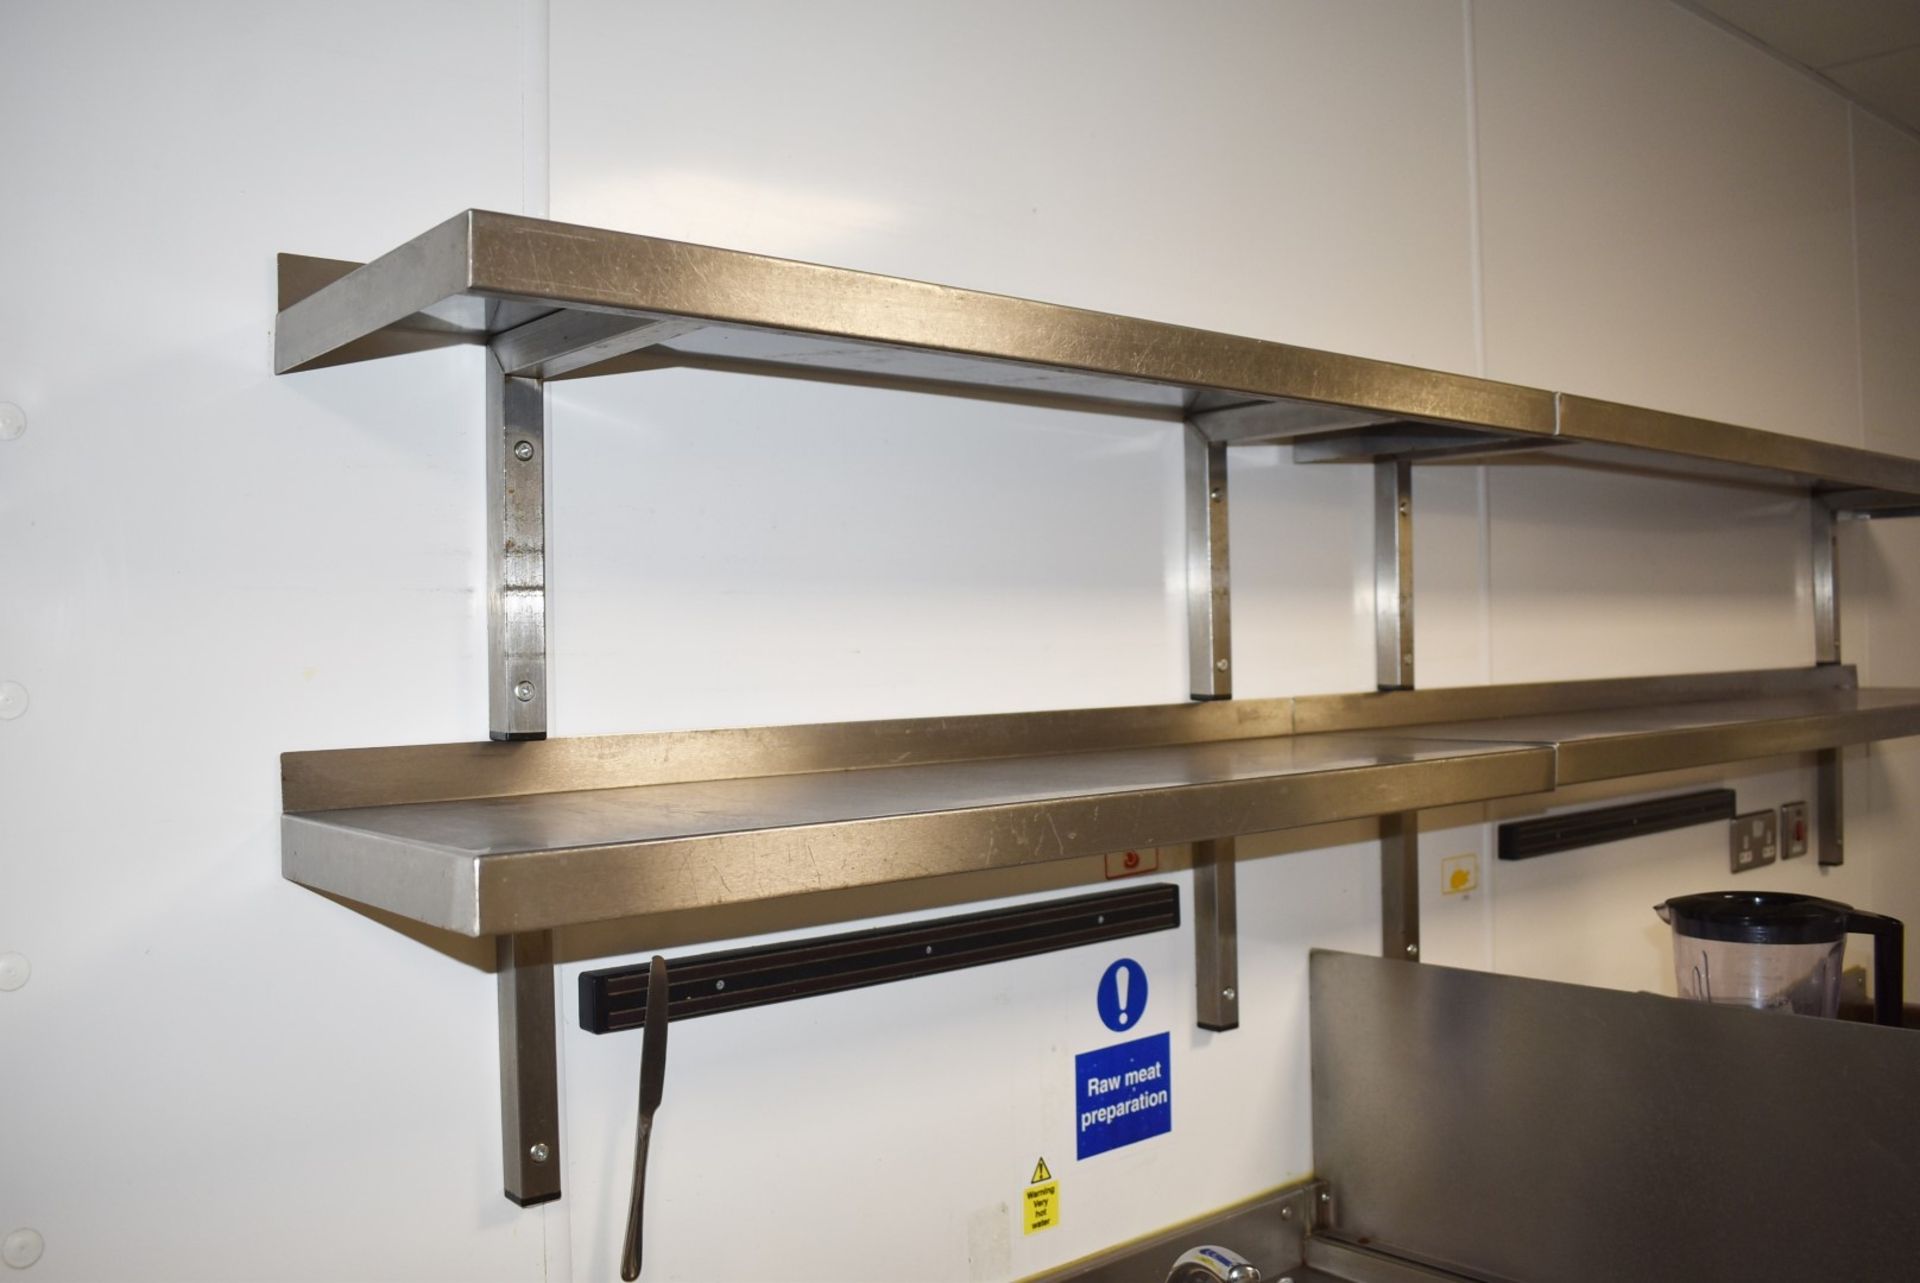 6 x Stainless Steel Wall Mounted Shelves With Mounting Brackets - Sizes W57/W104/W156 cms 2 of Each - Image 4 of 5